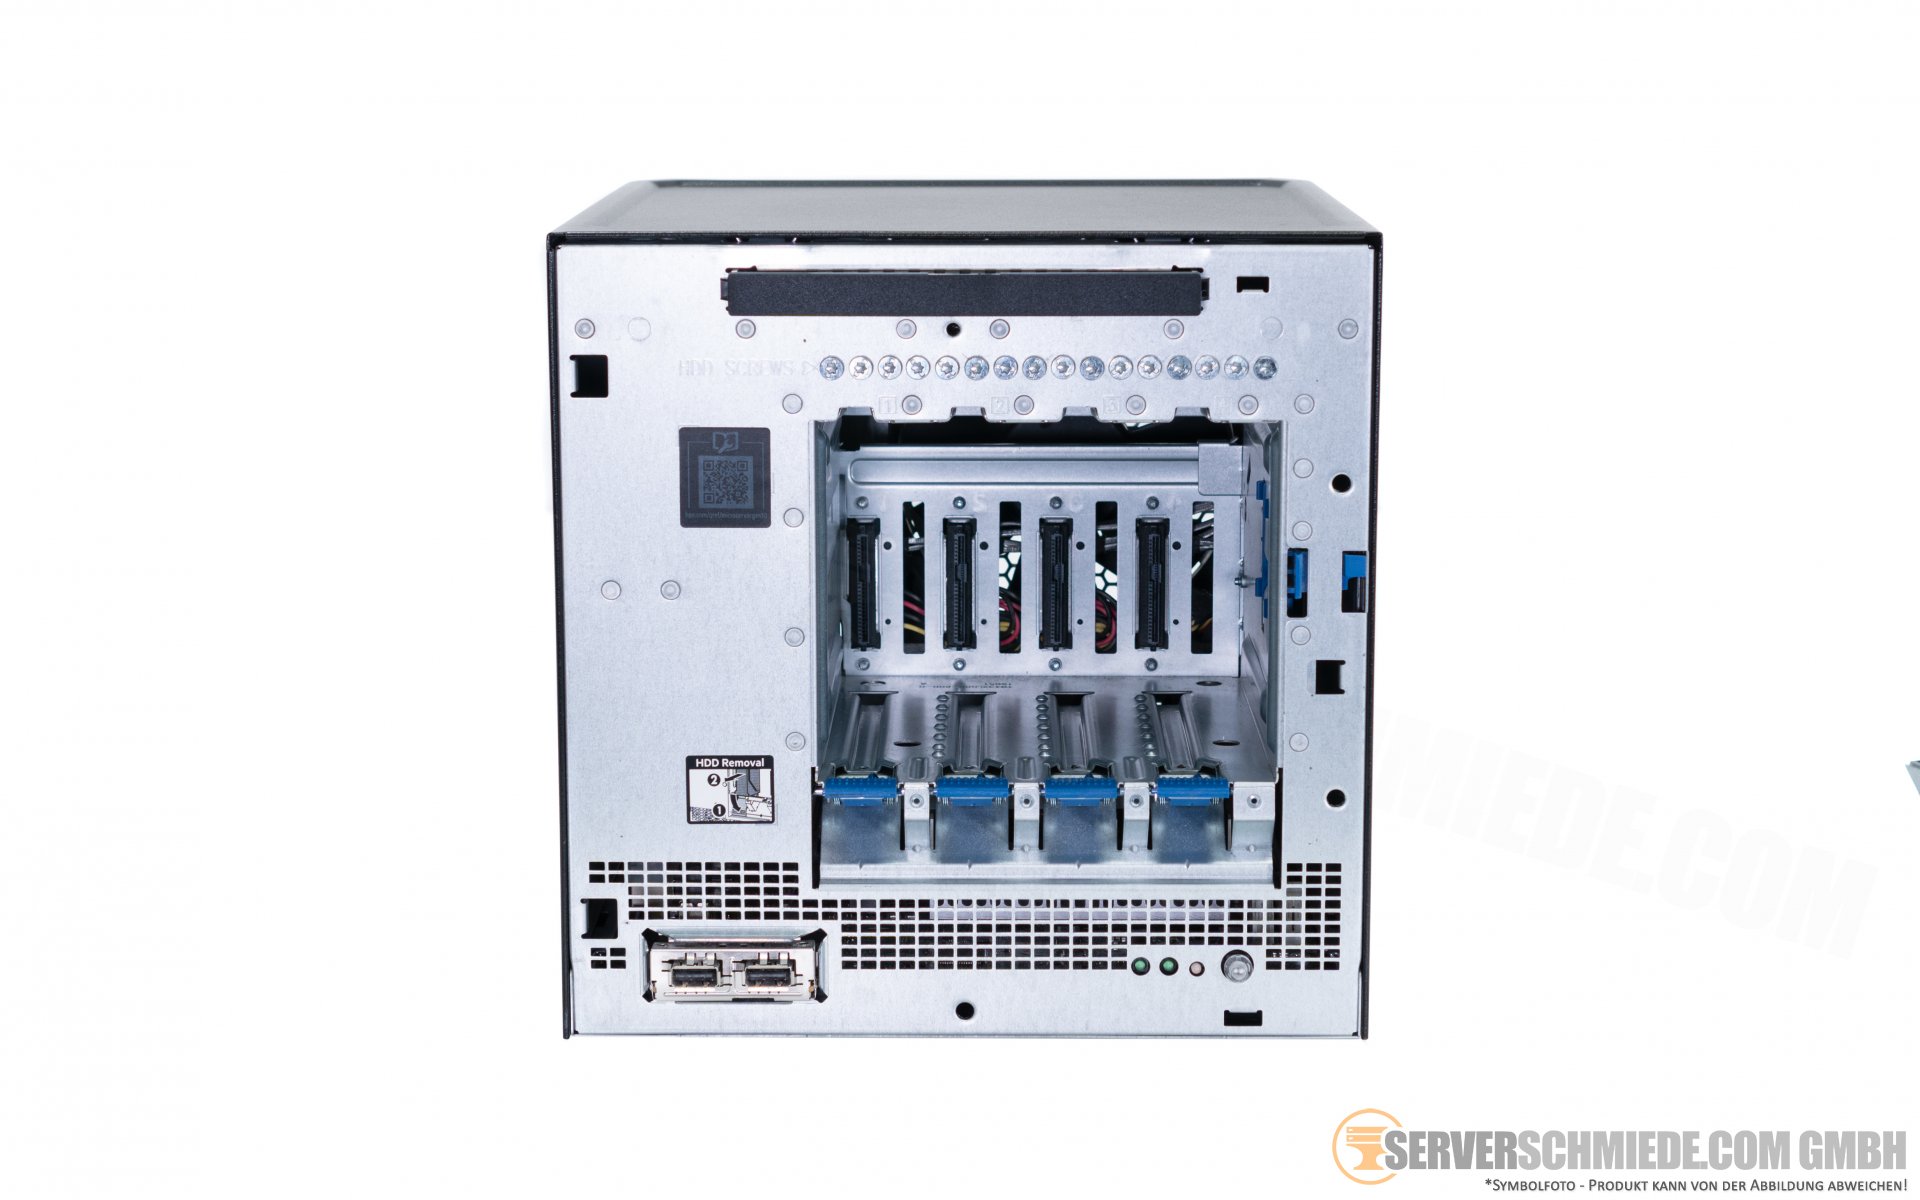 HPE ProLiant MicroServer Gen10 Entry - ultra micro tower - Opteron X3216  1.6 GHz - 8 GB - no HDD